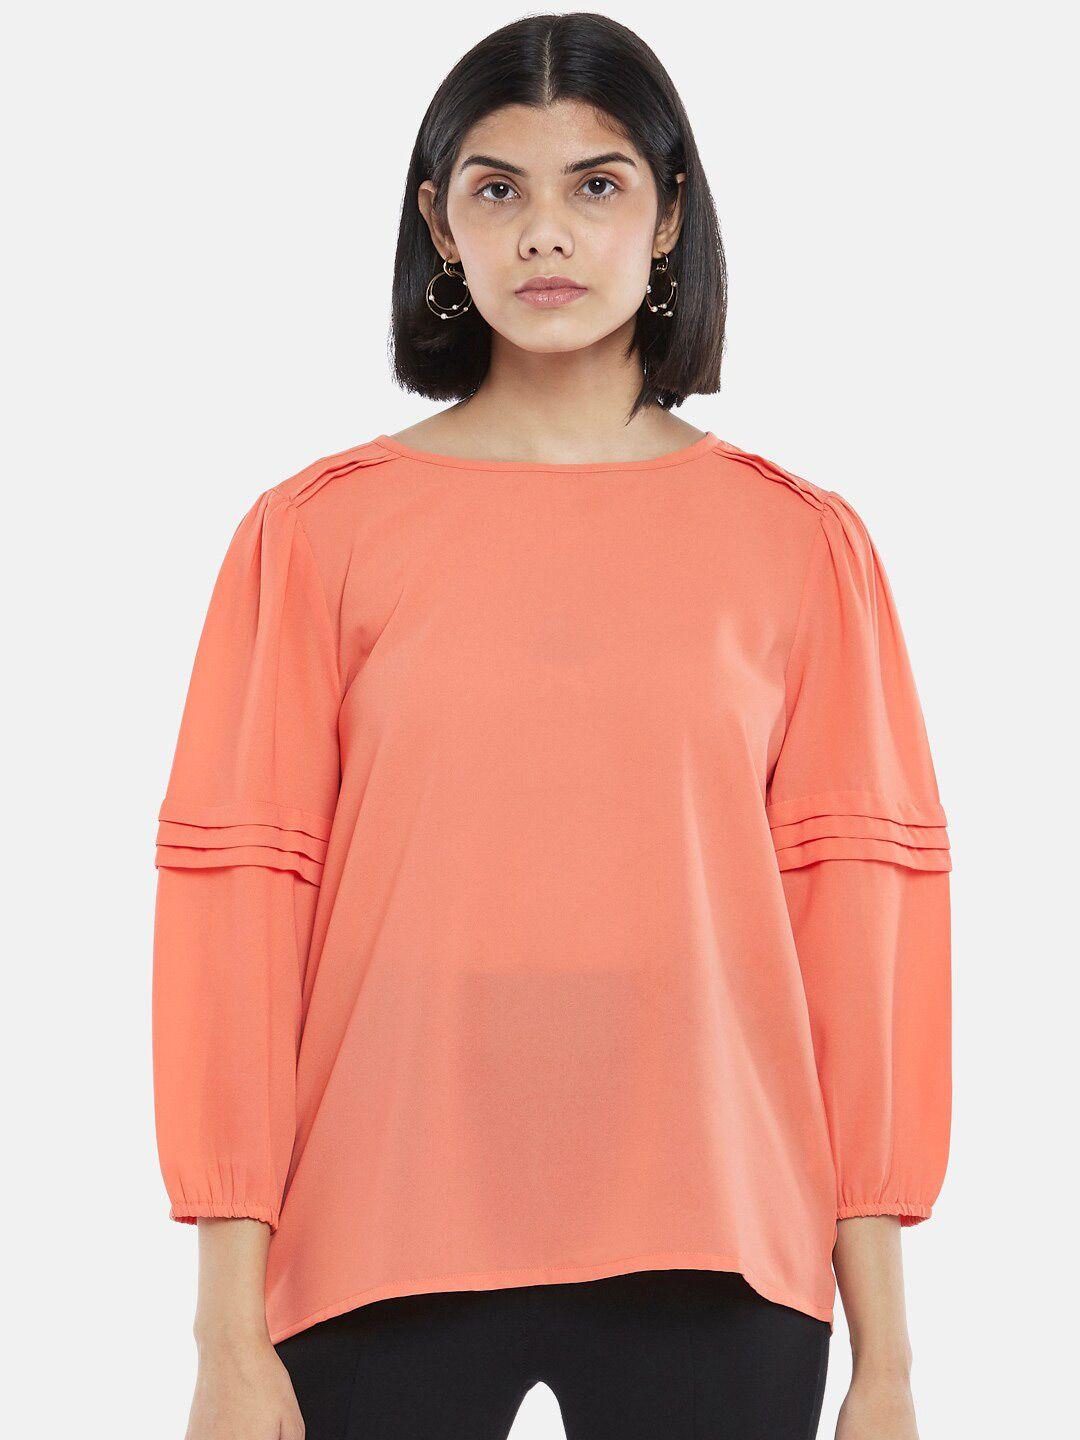 annabelle by pantaloons coral orange cuffed sleeves top